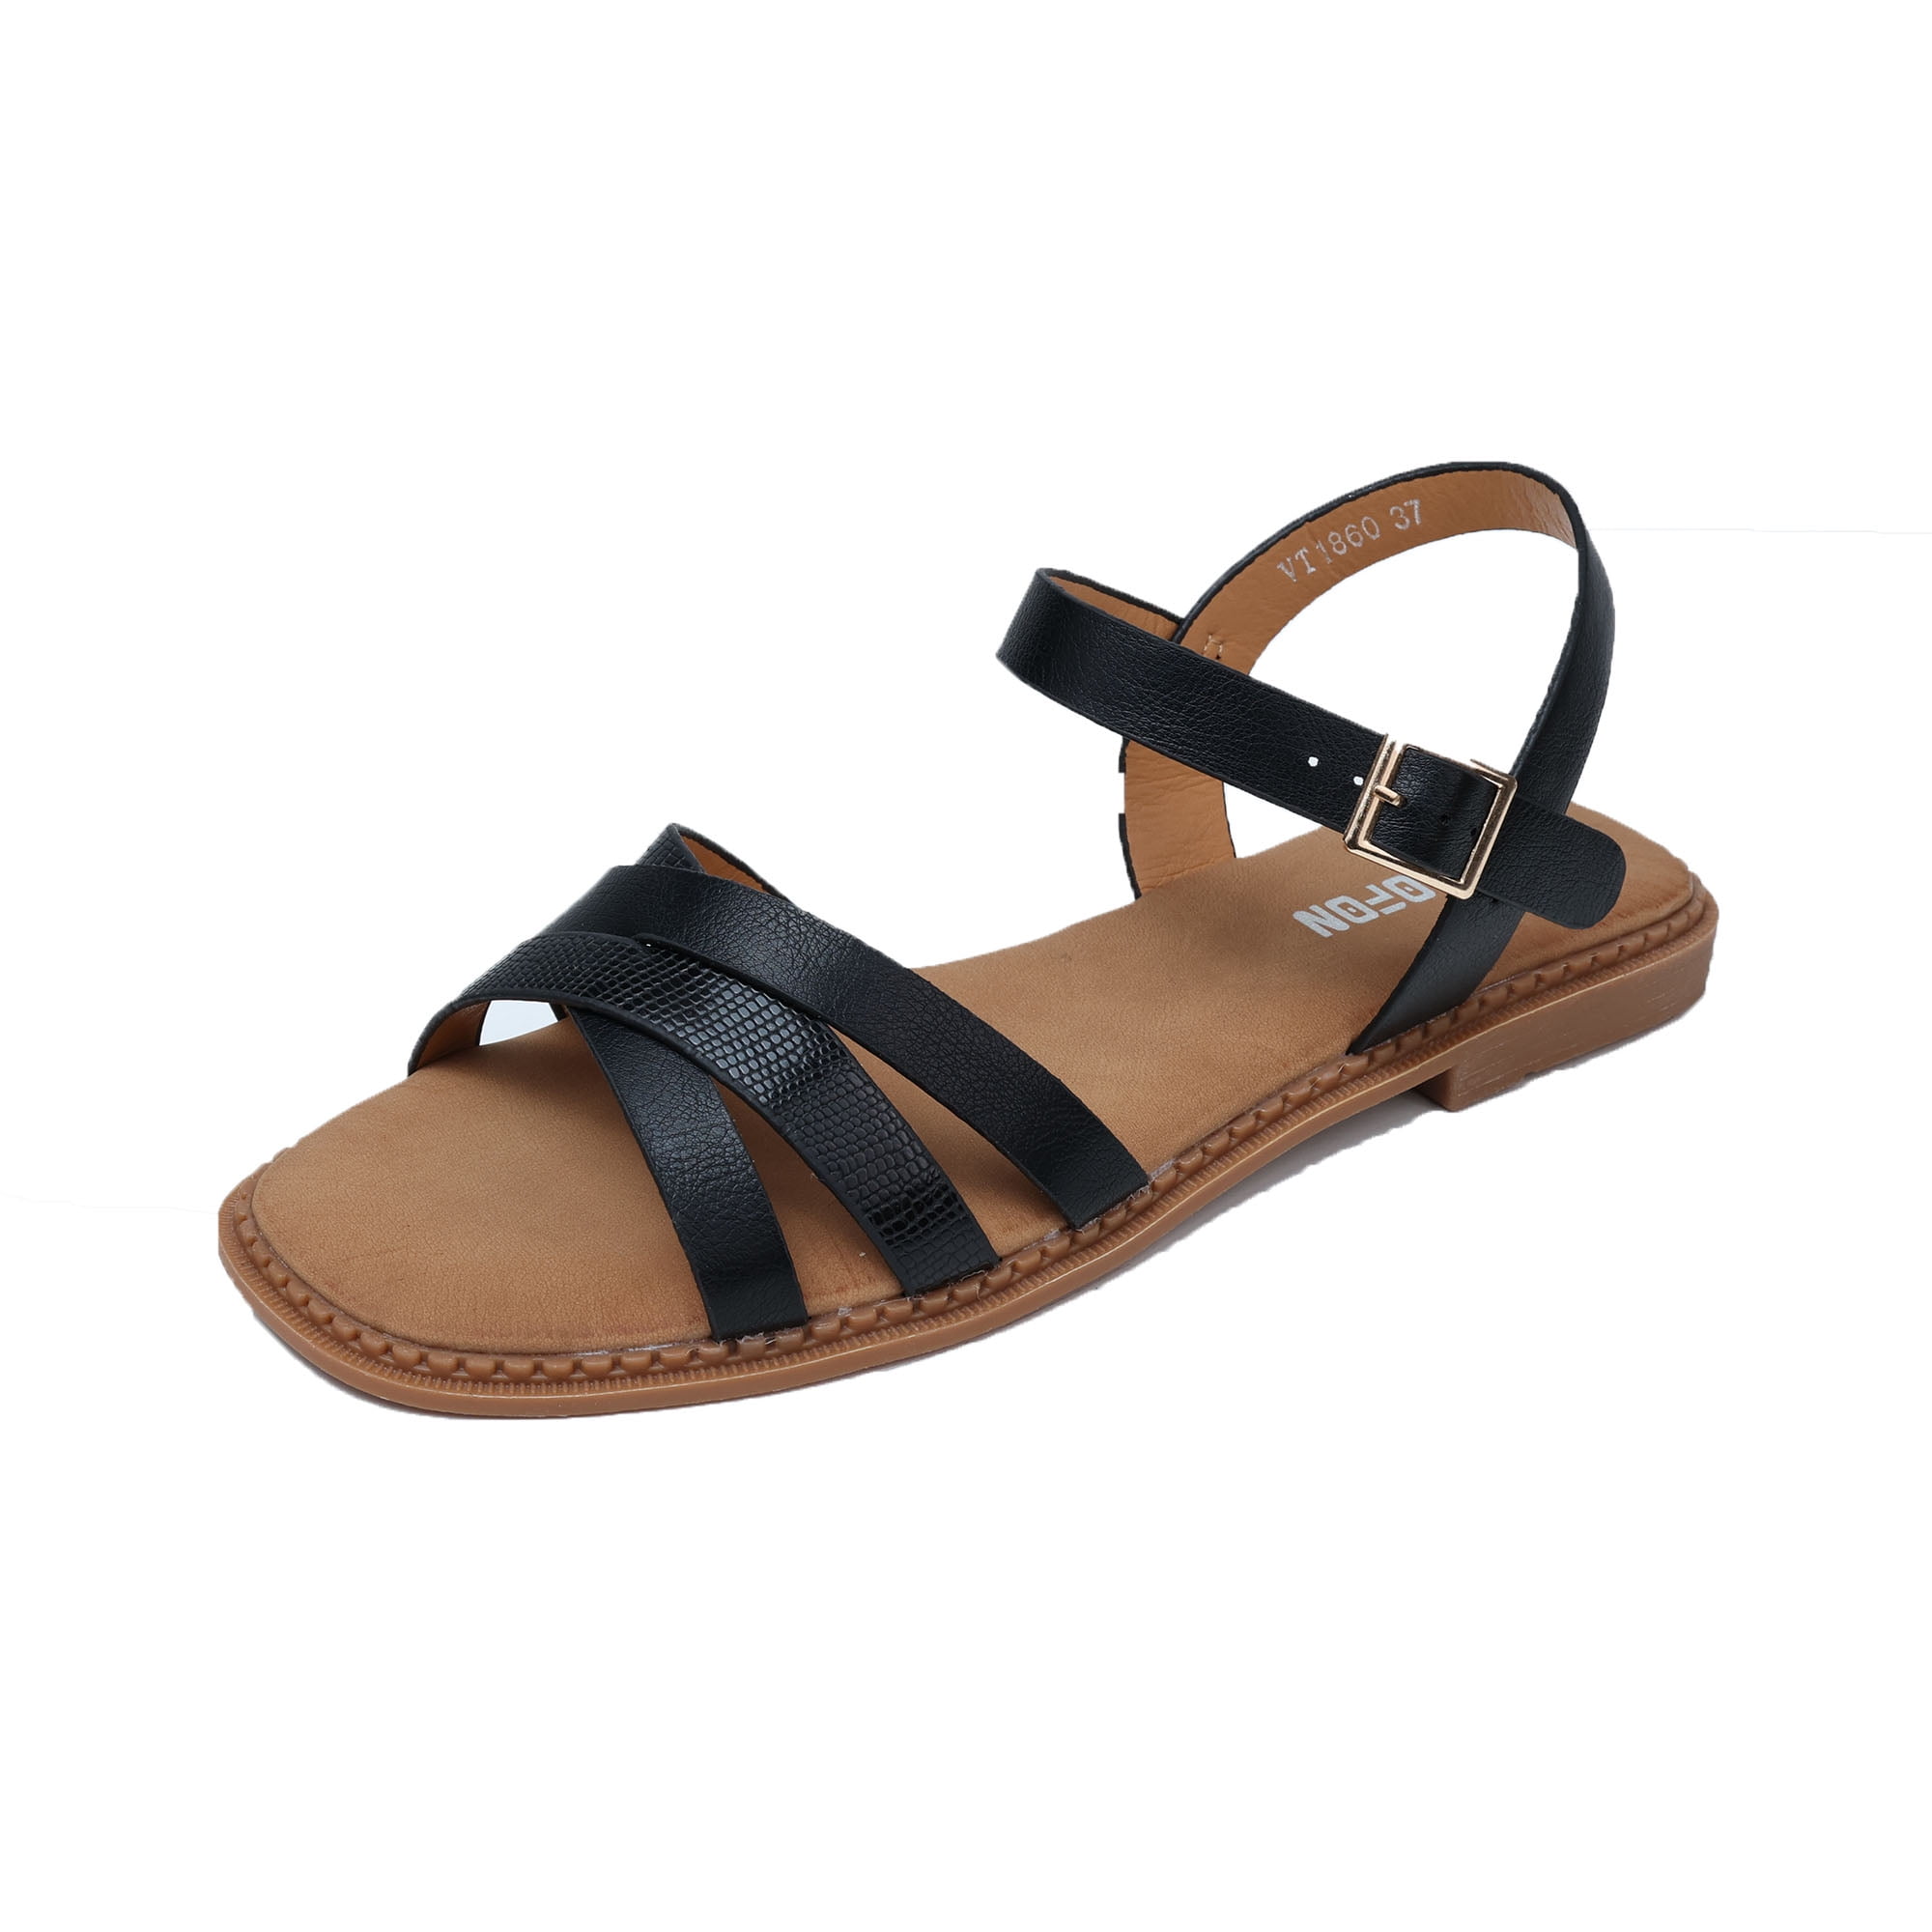 SHIBEVER Summer Women's Flat Sandals Casual Sandals Ankle Strap Open ...